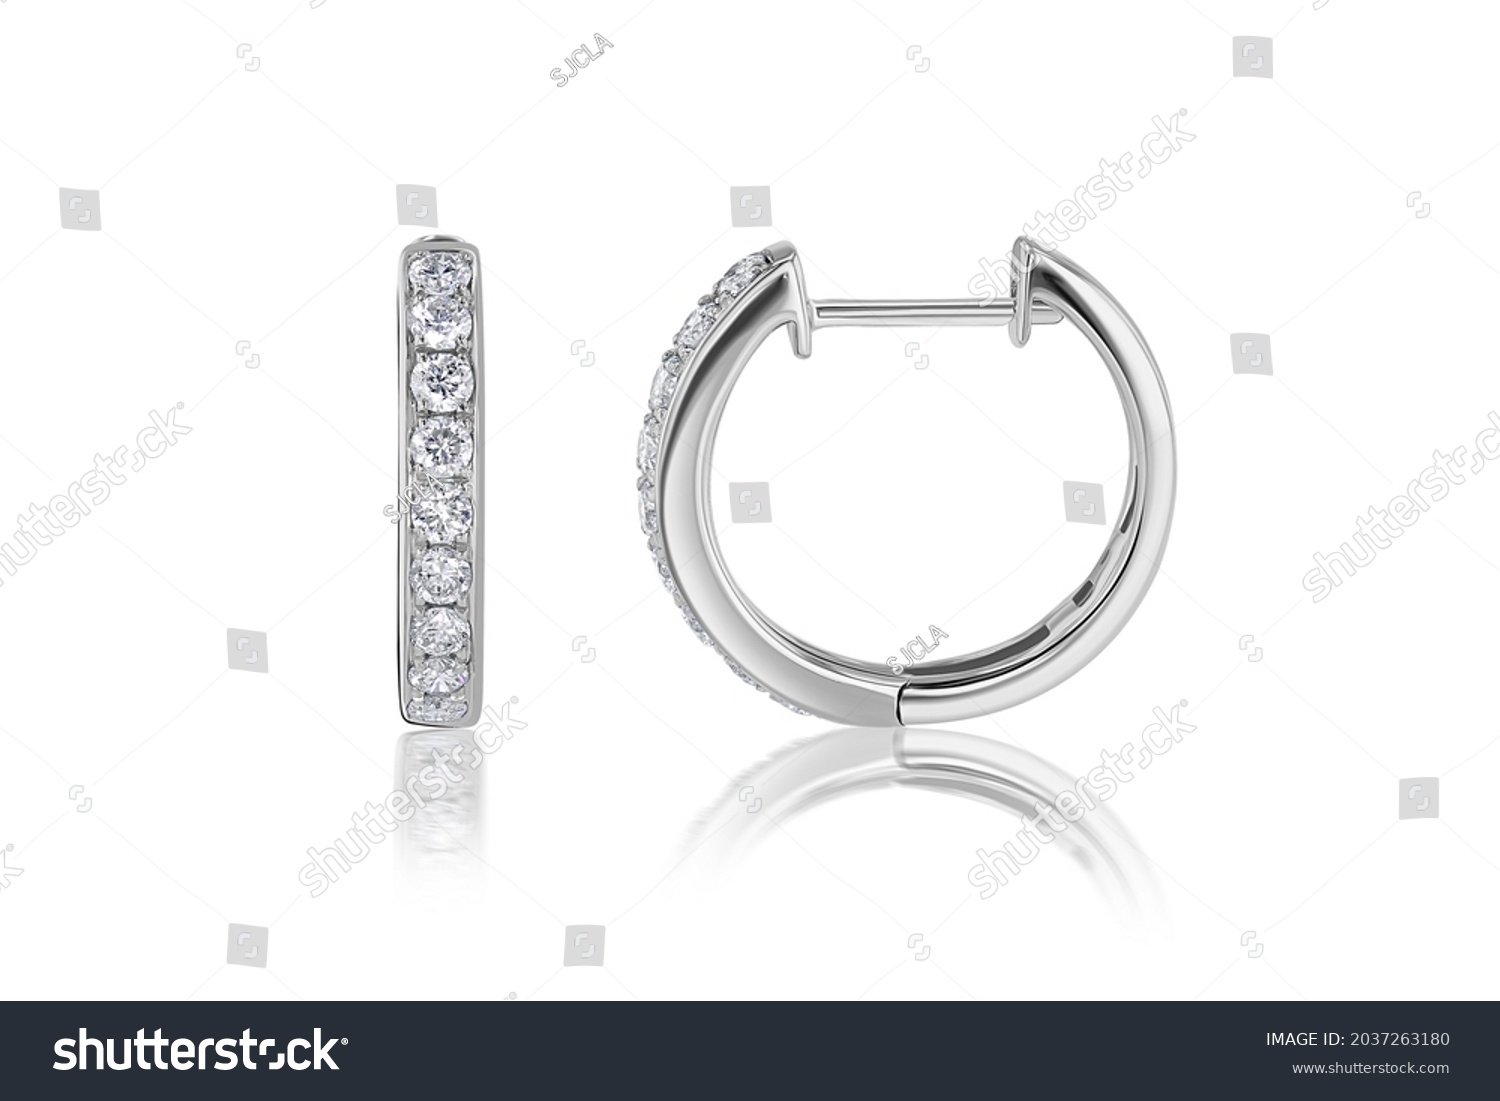 Subject Shot of Diamond Huggie Hoop Earrings on a White Background with Reflection. Earrings metal is 14k White Gold.  #2037263180